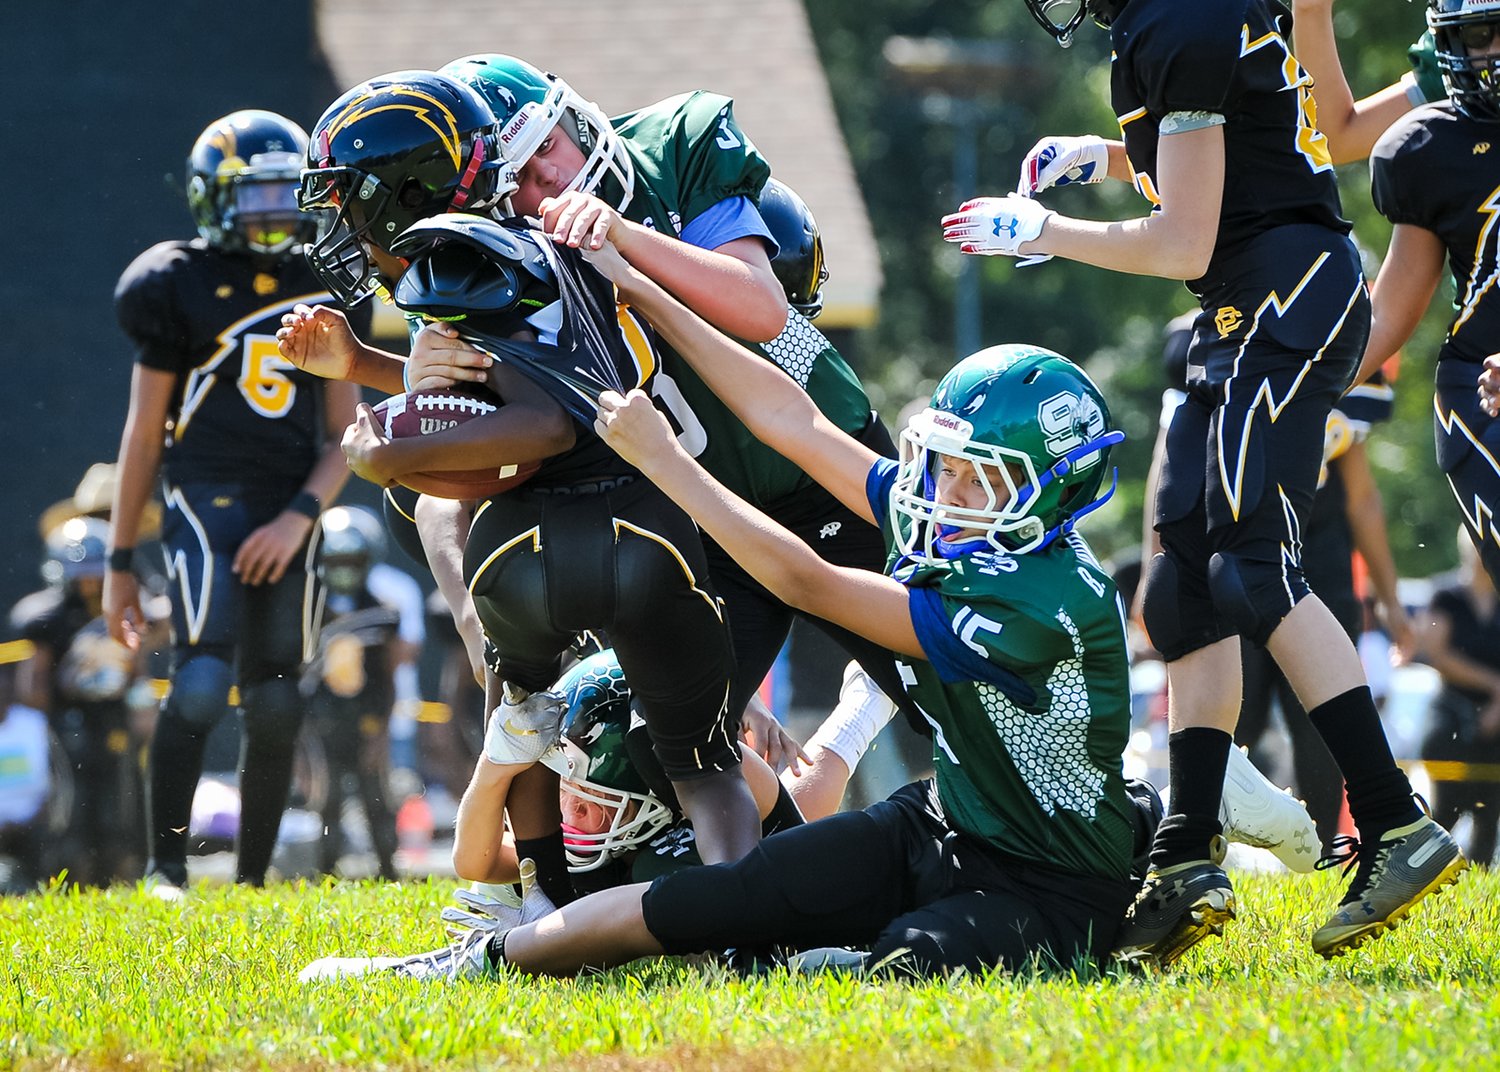 Youth tackle football is now allowed this year following an initial decision to limit the sport to flag football only.